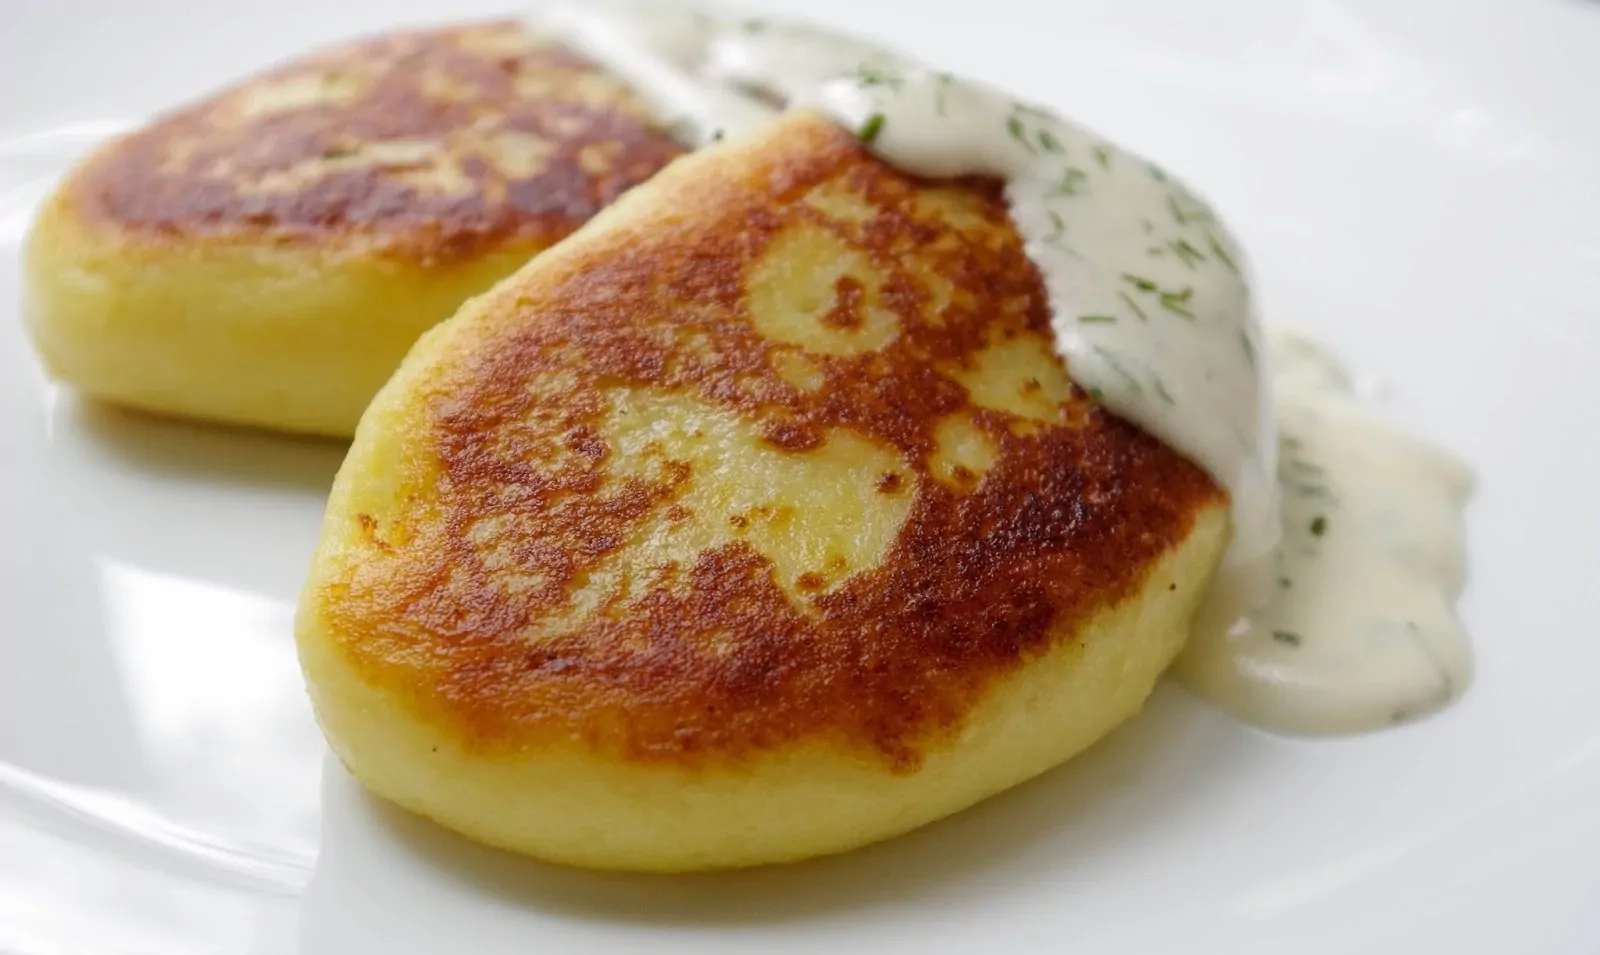 Lithuanian-style potato pancakes with meat